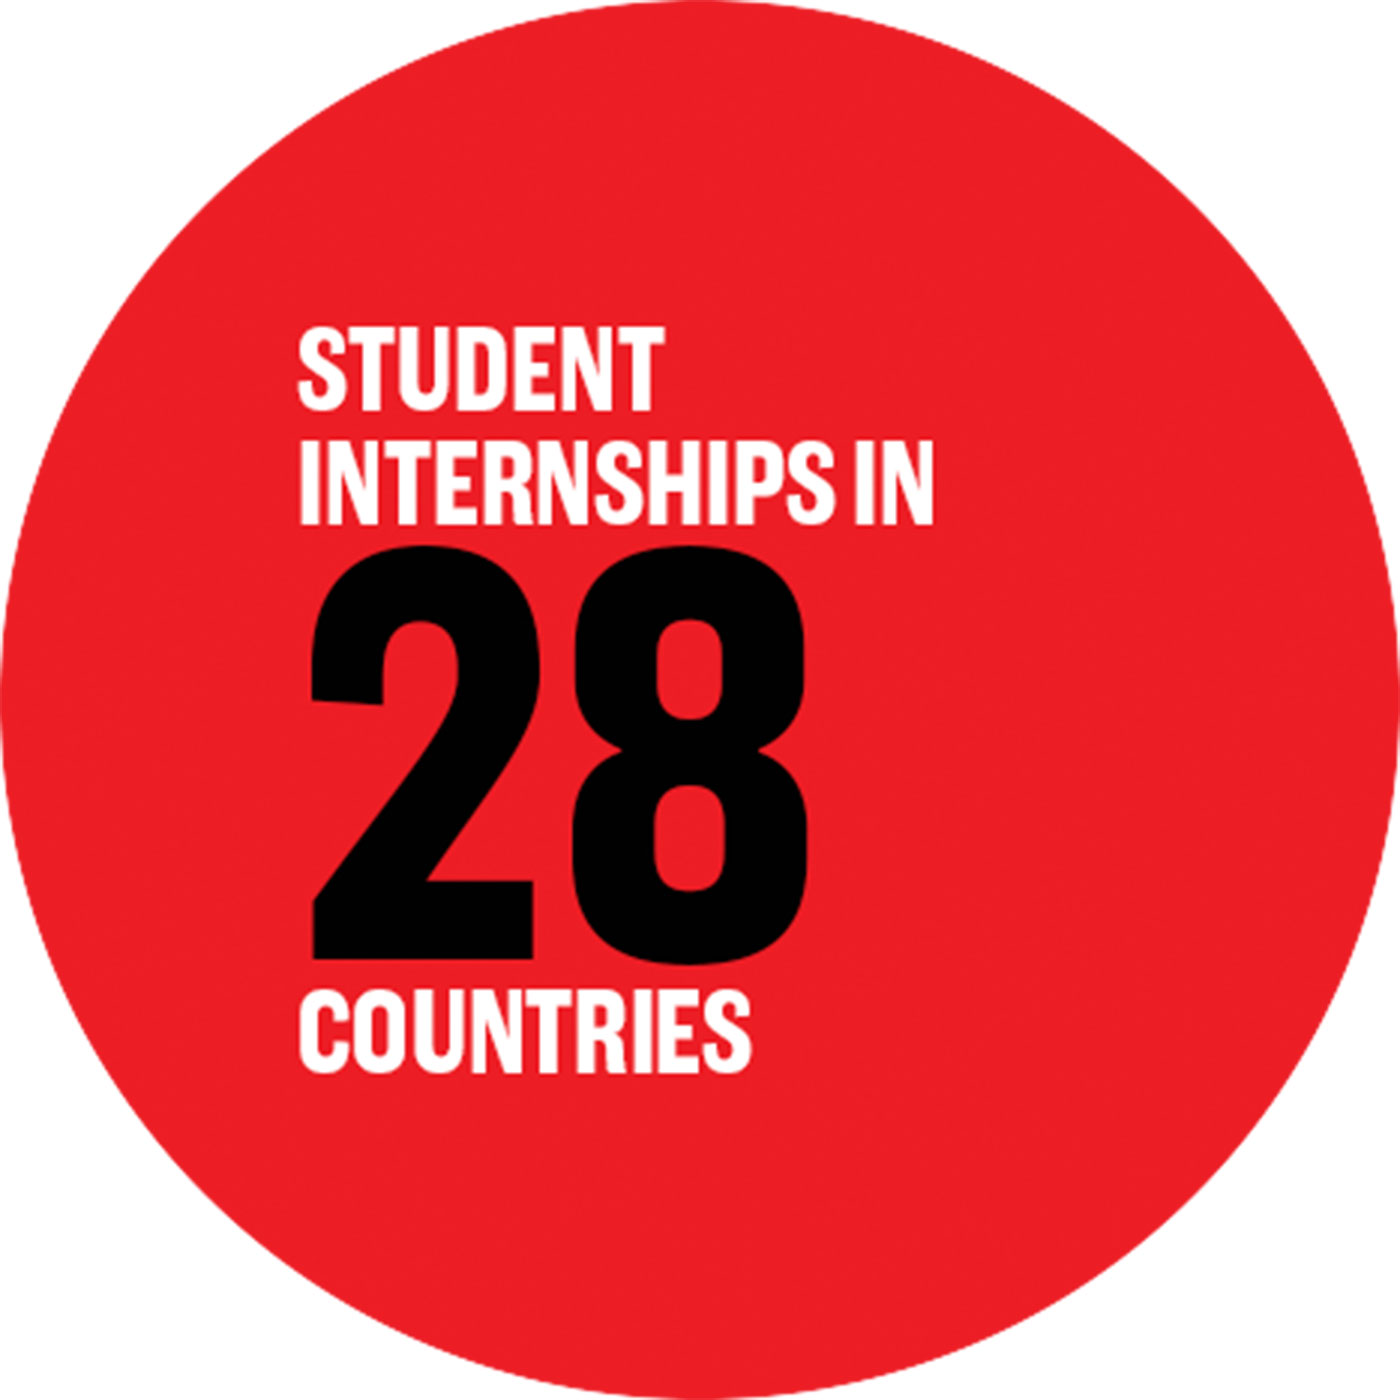 student internships in 28 countries